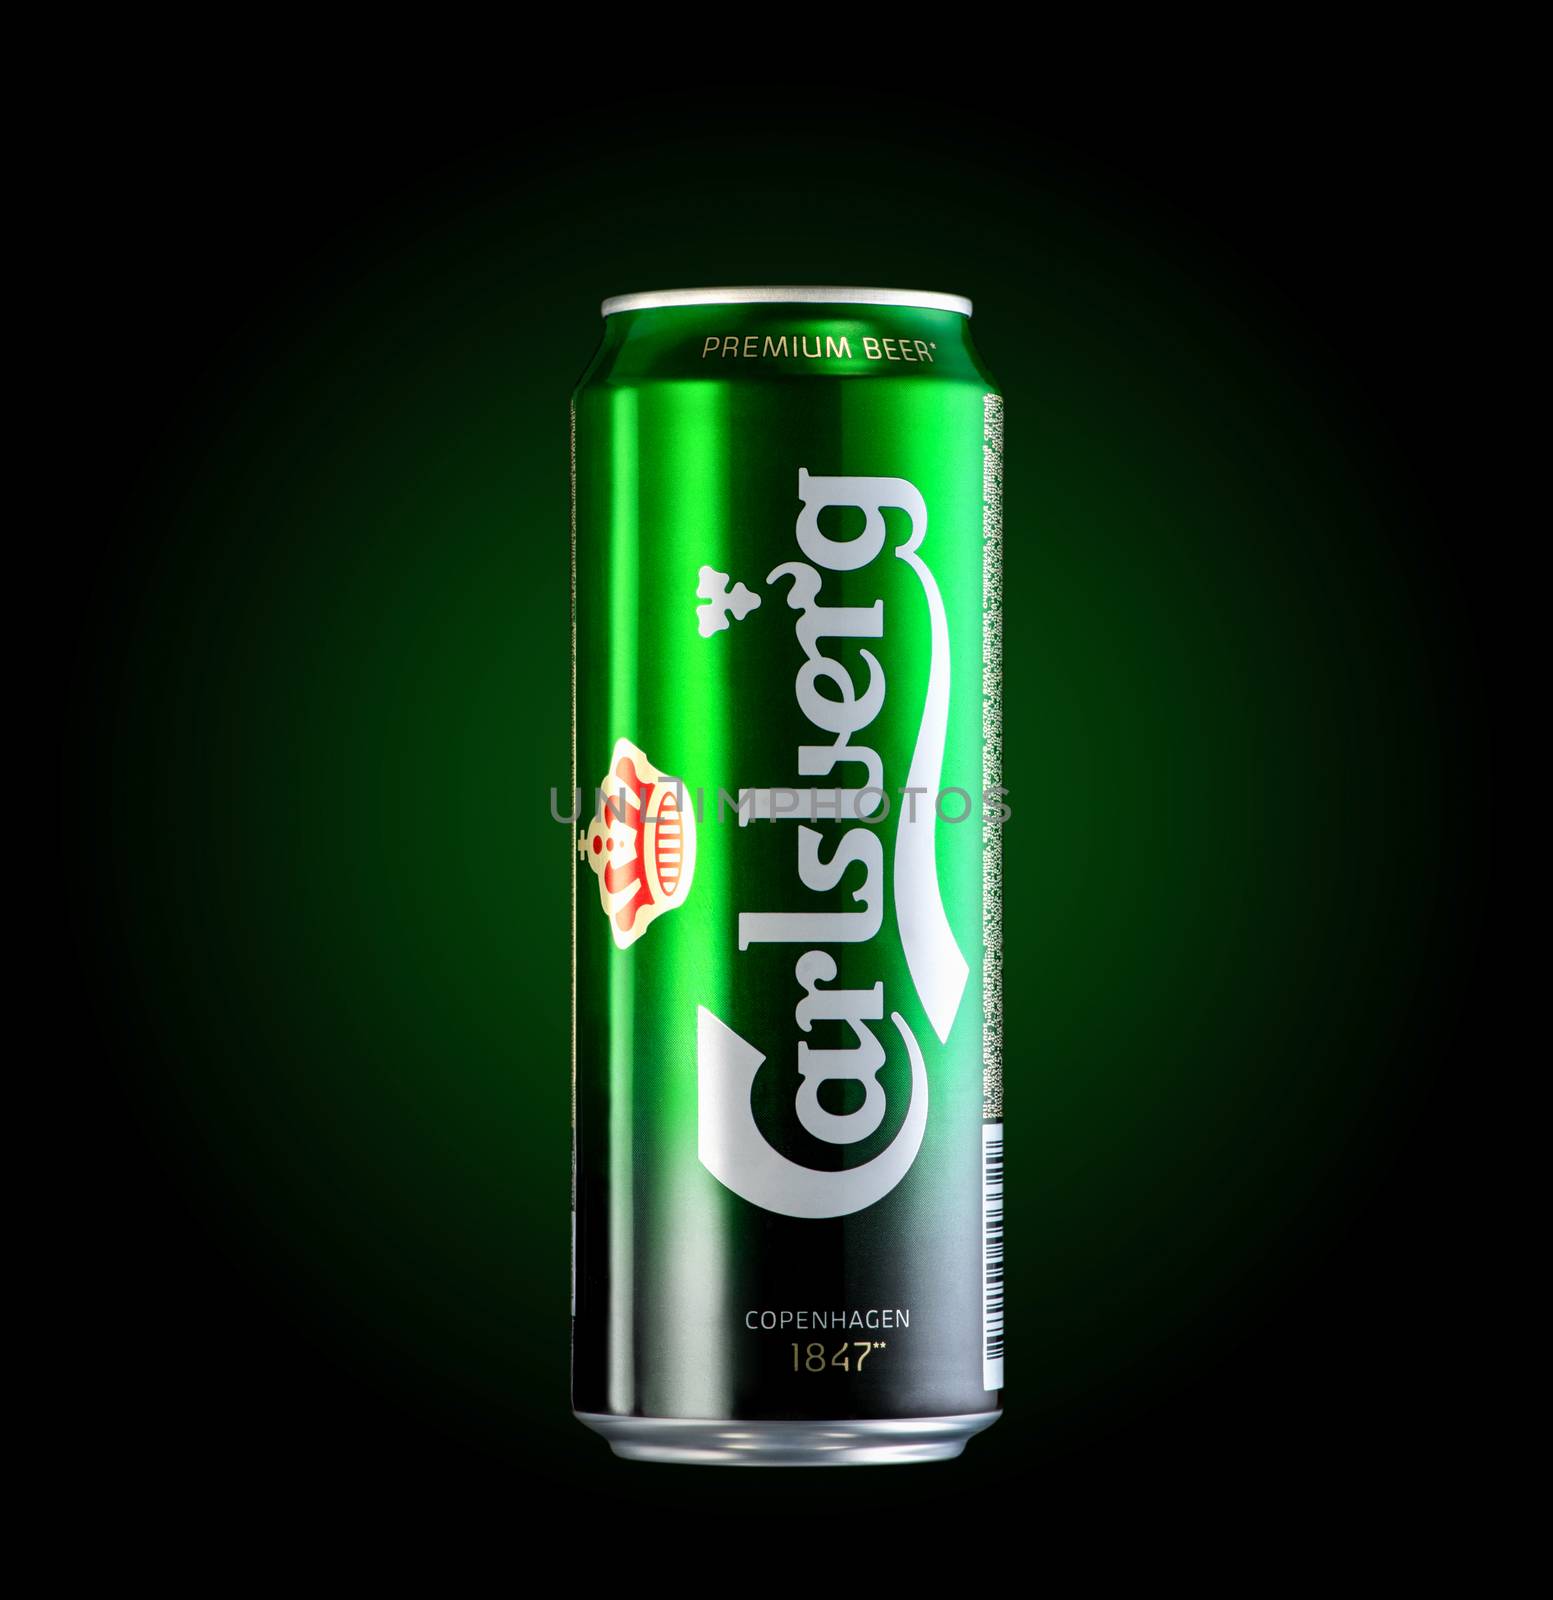 Almaty, Kazakhstan - October 11, 2019: can of beer Carlsberg in a green background with illumination. Advertising a brand of beer